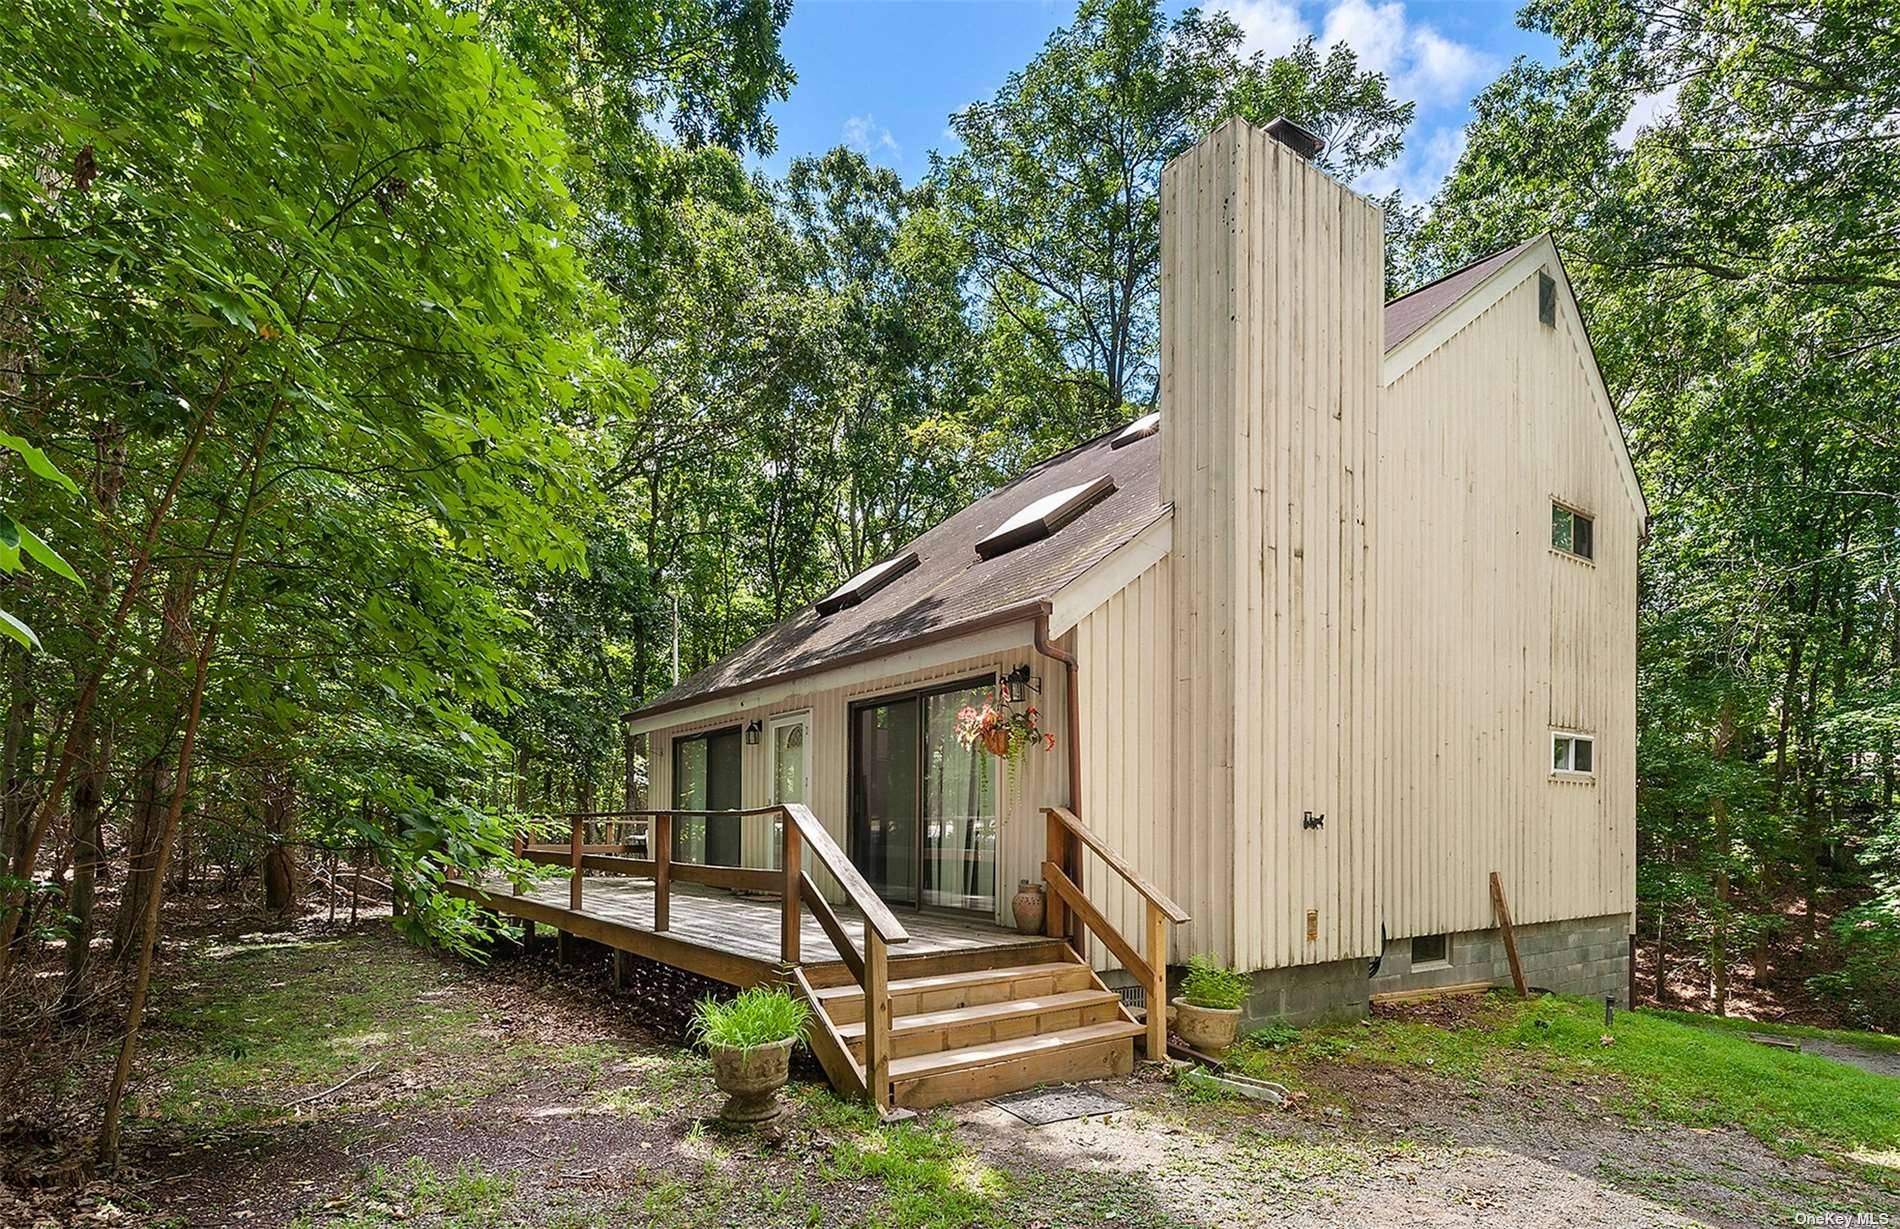 Sited on 1. 68 private, wooded acres, just a short distance east to Sag Harbor Village, or 1.